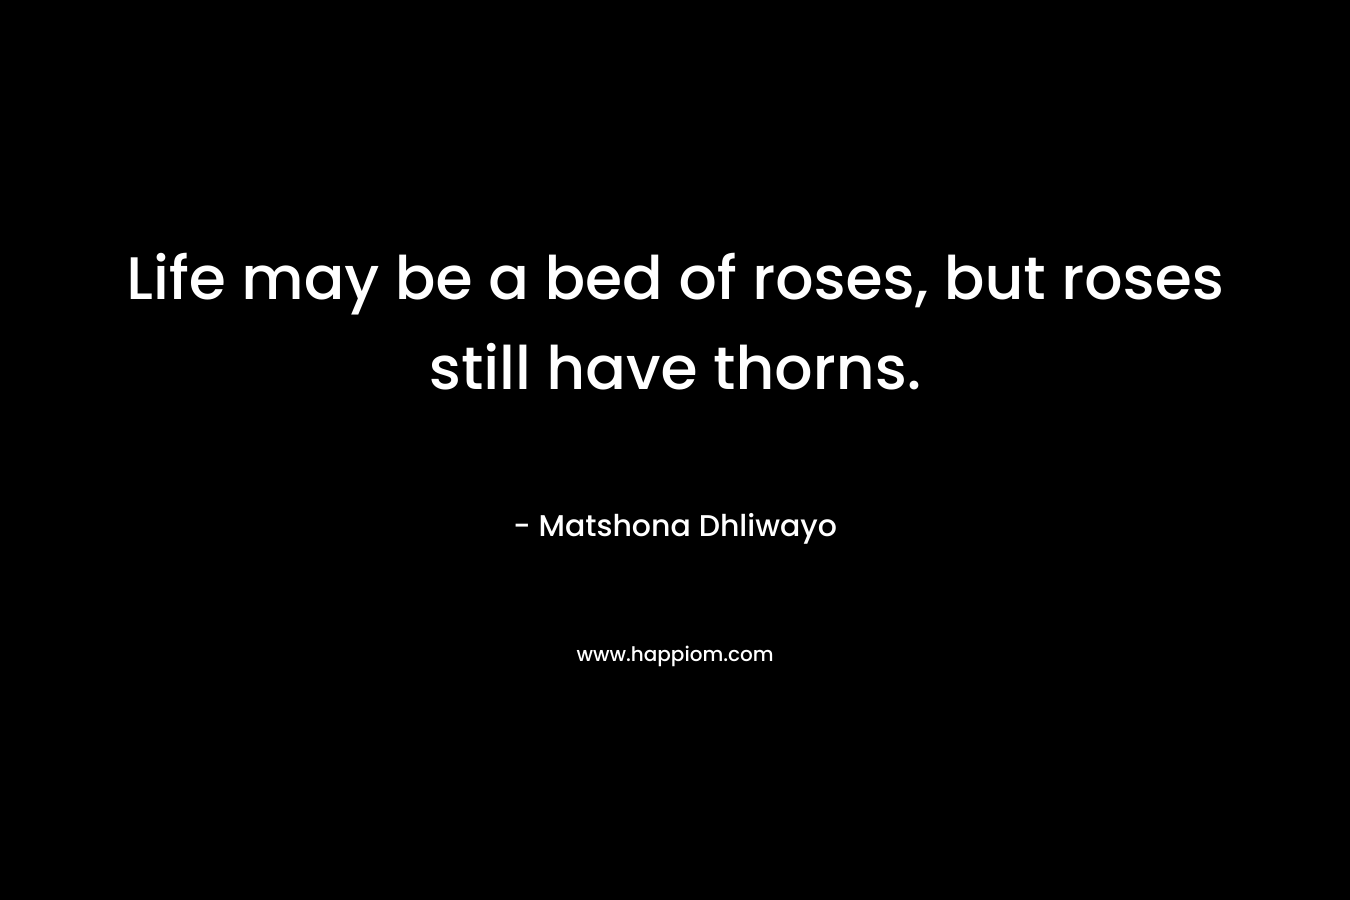 Life may be a bed of roses, but roses still have thorns.